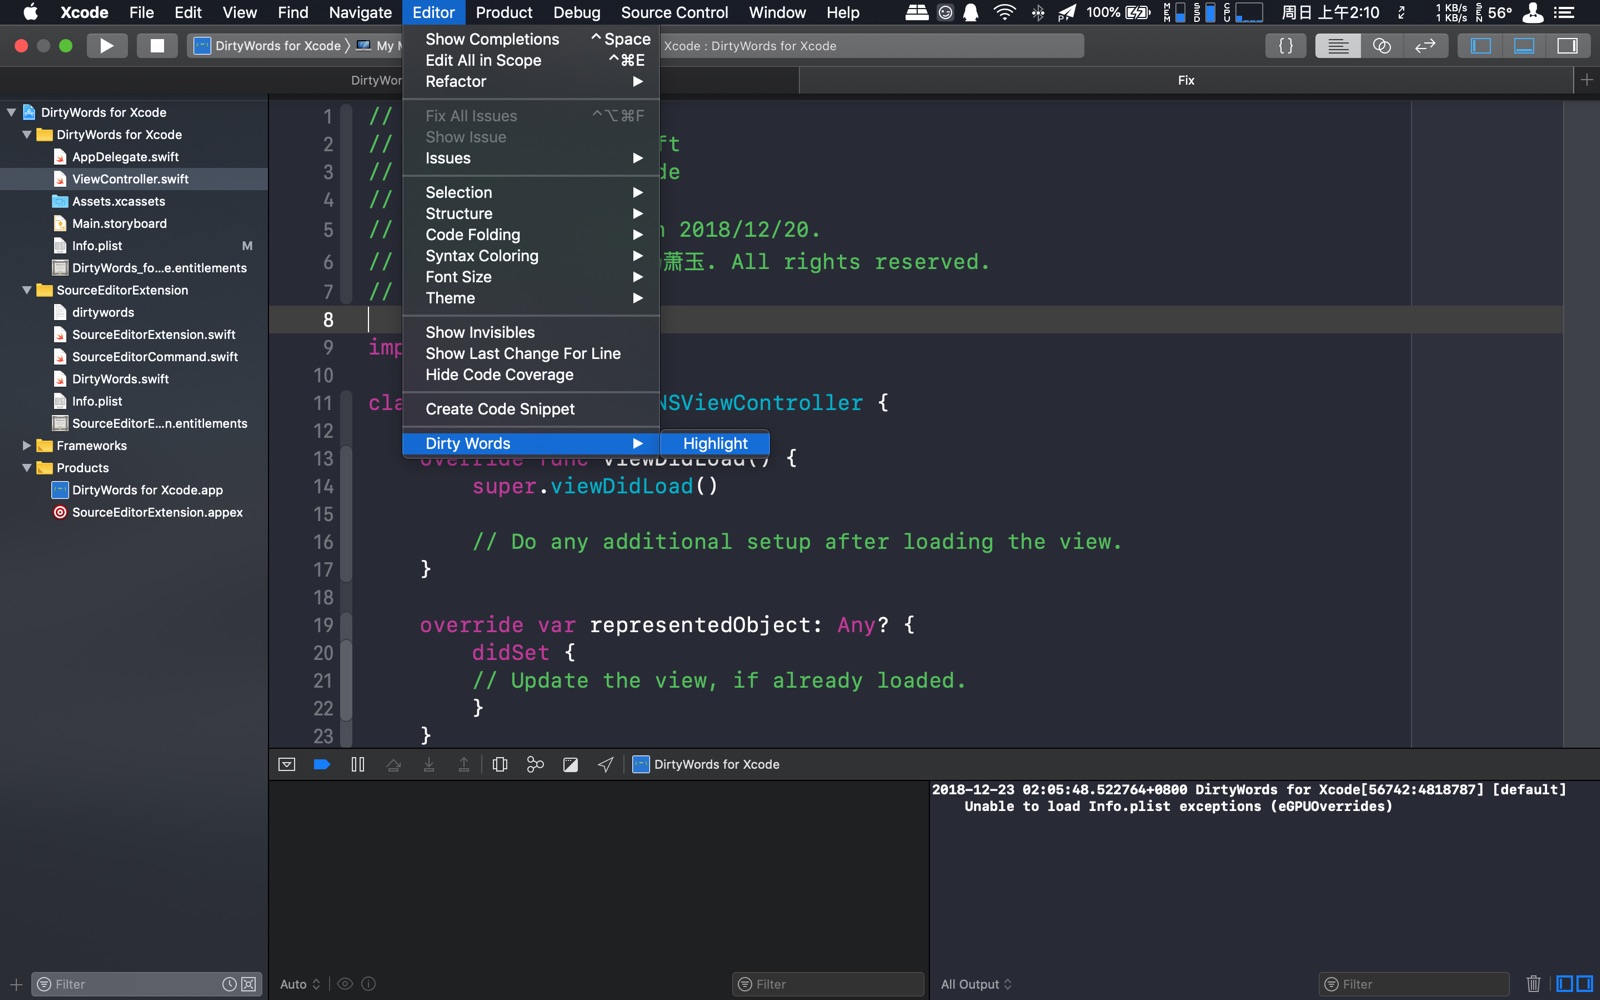 DirtyWords for Xcode 1.0 : Main Window